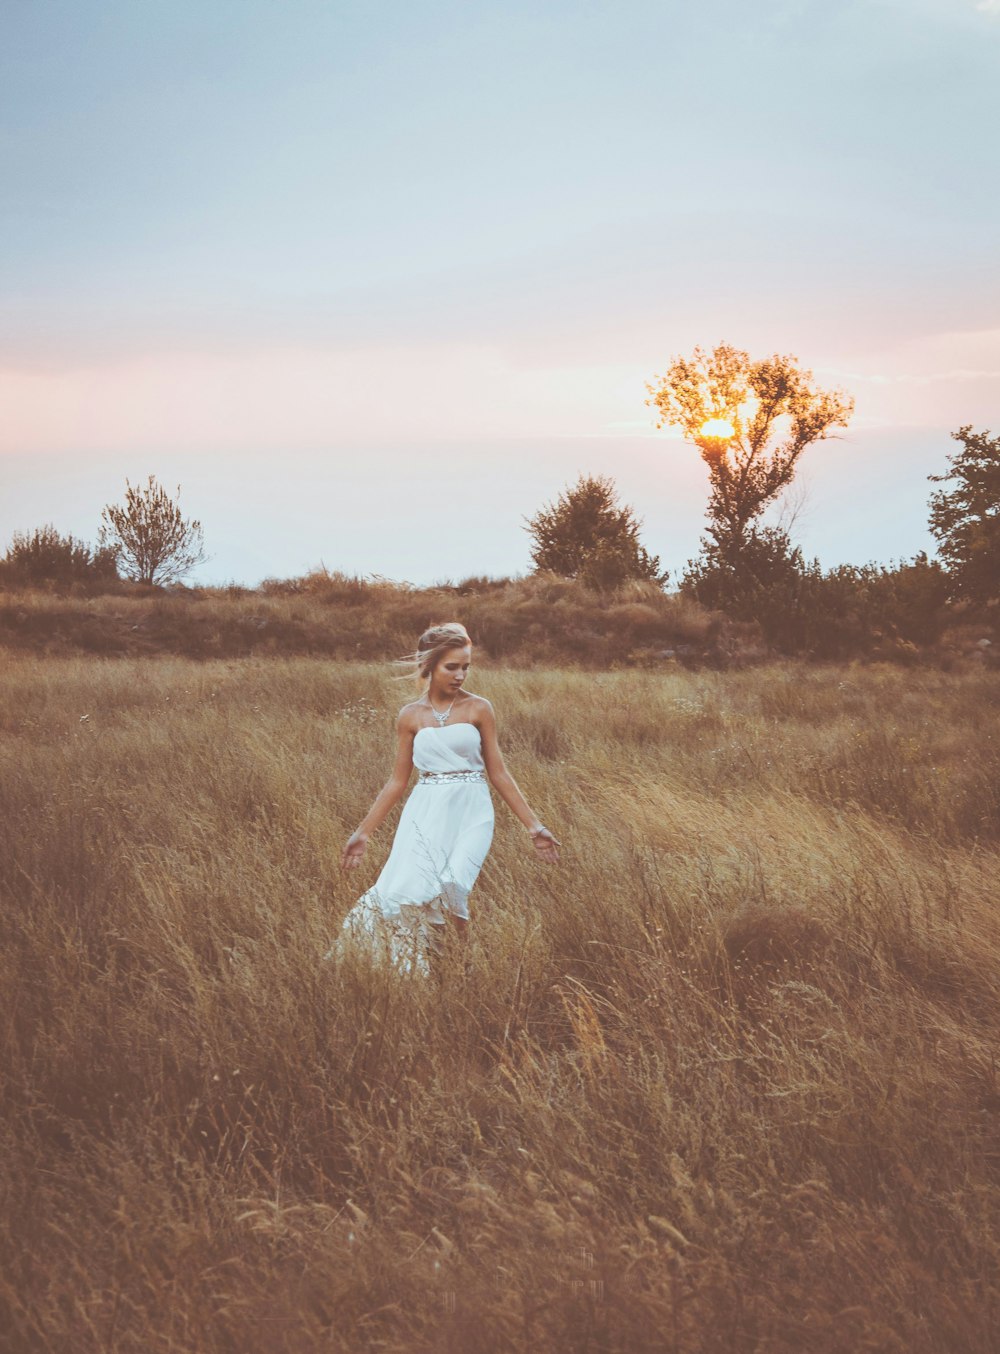 woman in white dress standing on brown grass field during sunset